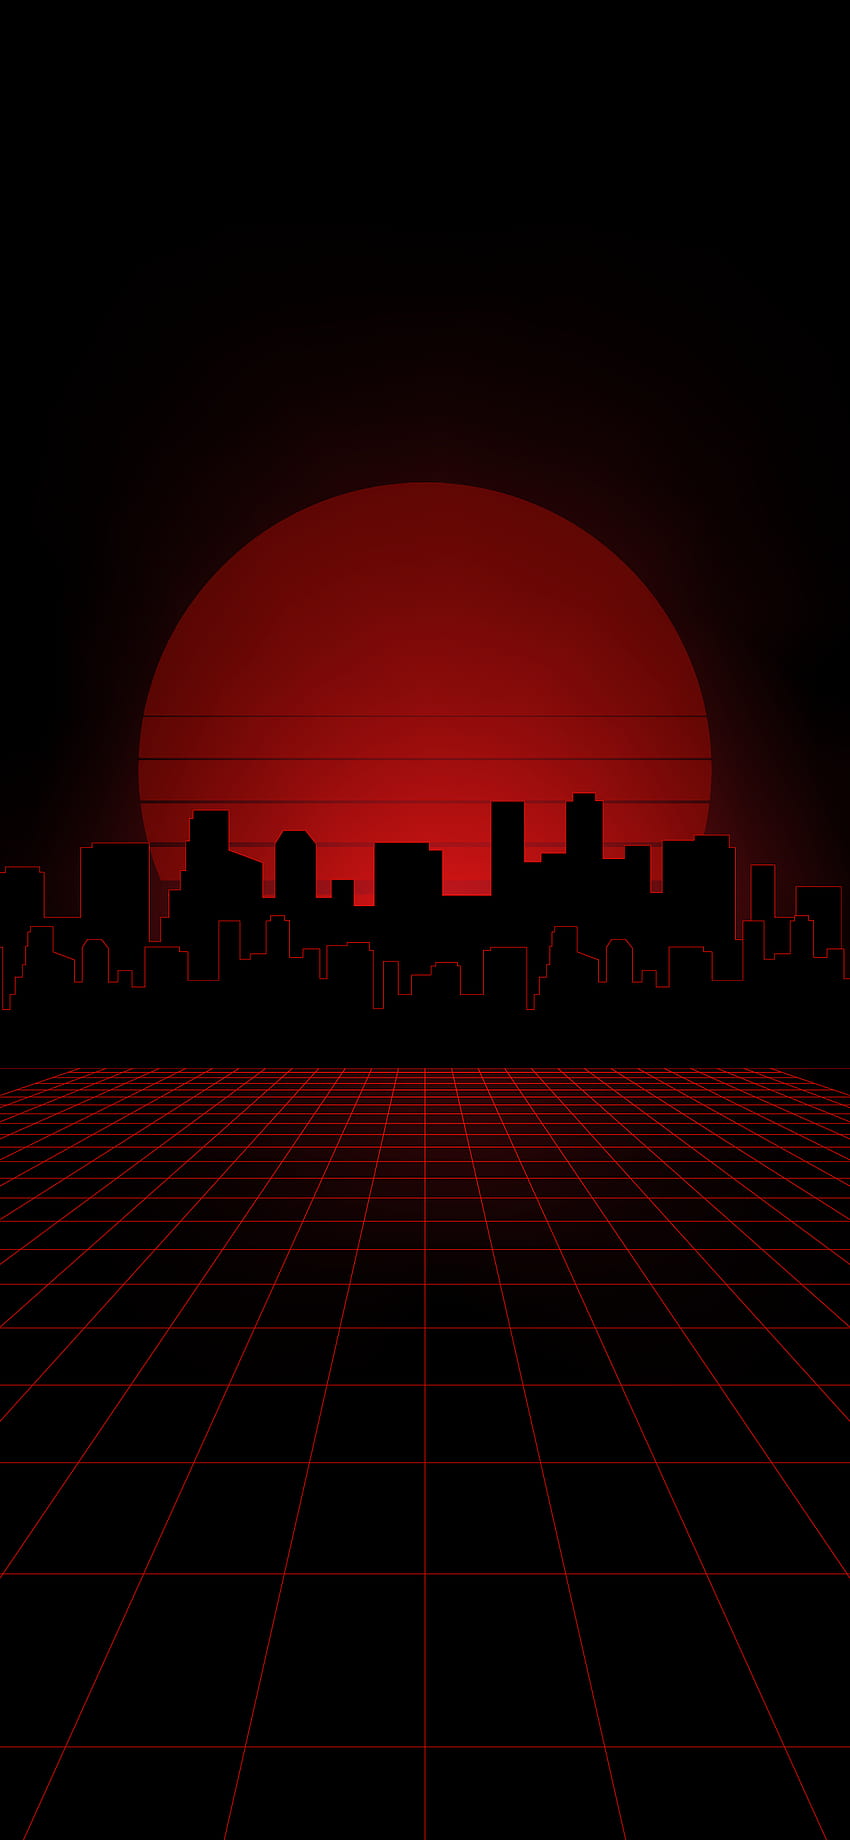 SYNTHWAVE CITY PHONE, red city aesthetic HD phone wallpaper